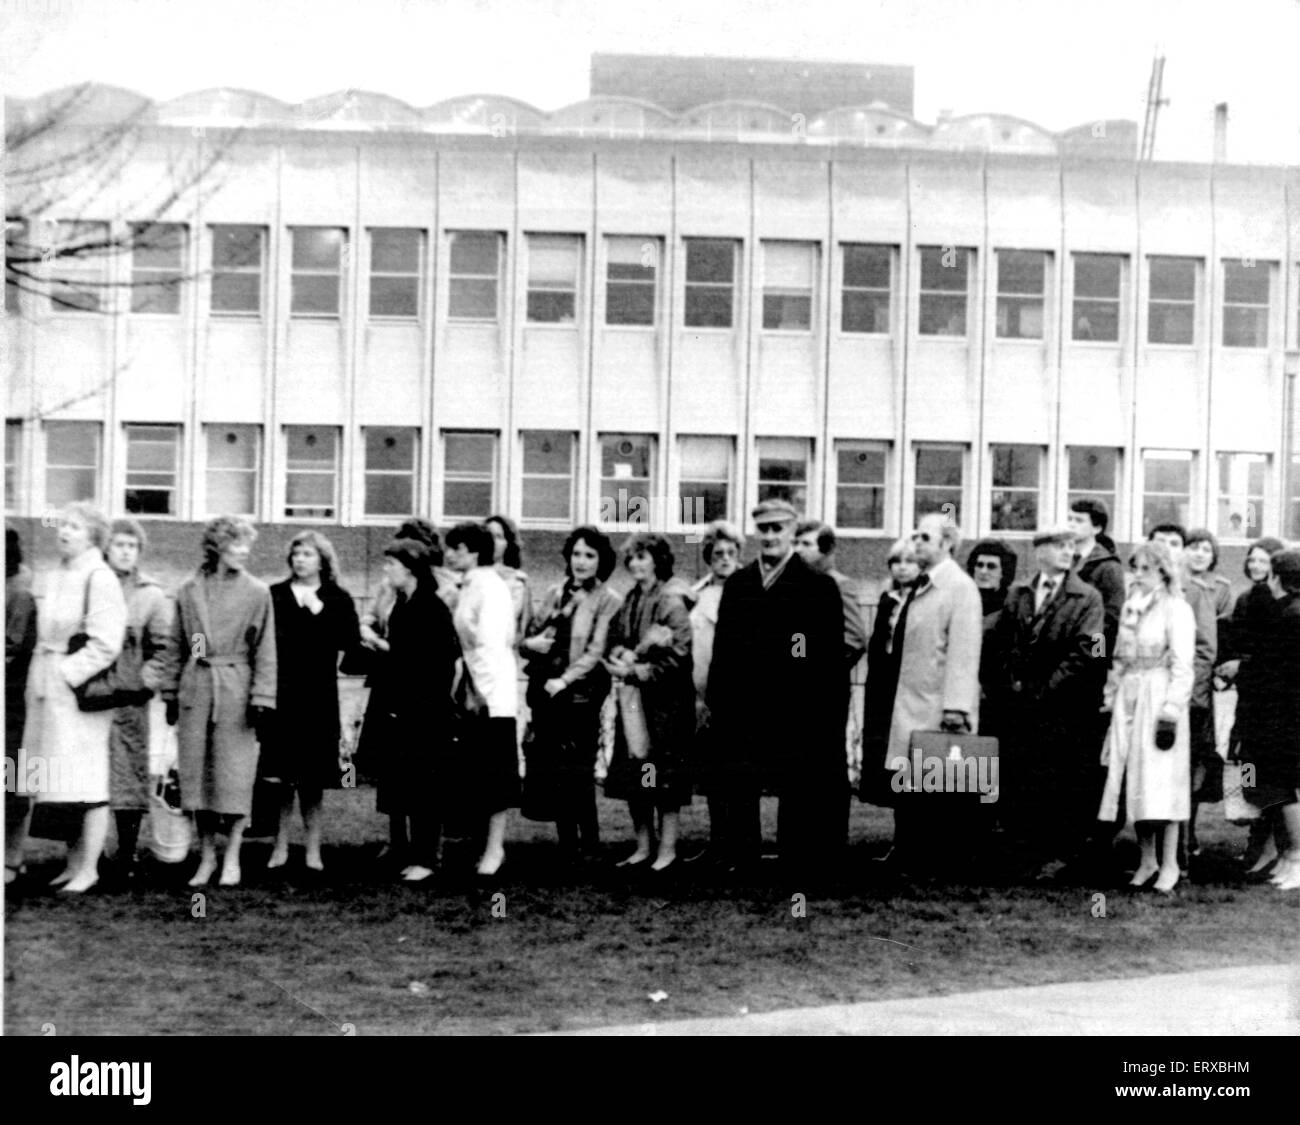 Miners Strike 1984 - 1985 Pictured. Office workers queue outside the National Coal Board's Yorkshire Area HQ in Doncaster waiting to start  work Monday 26th March 1984.  On 6th March 1984 the National Coal Board announced that the agreement reached after Stock Photo